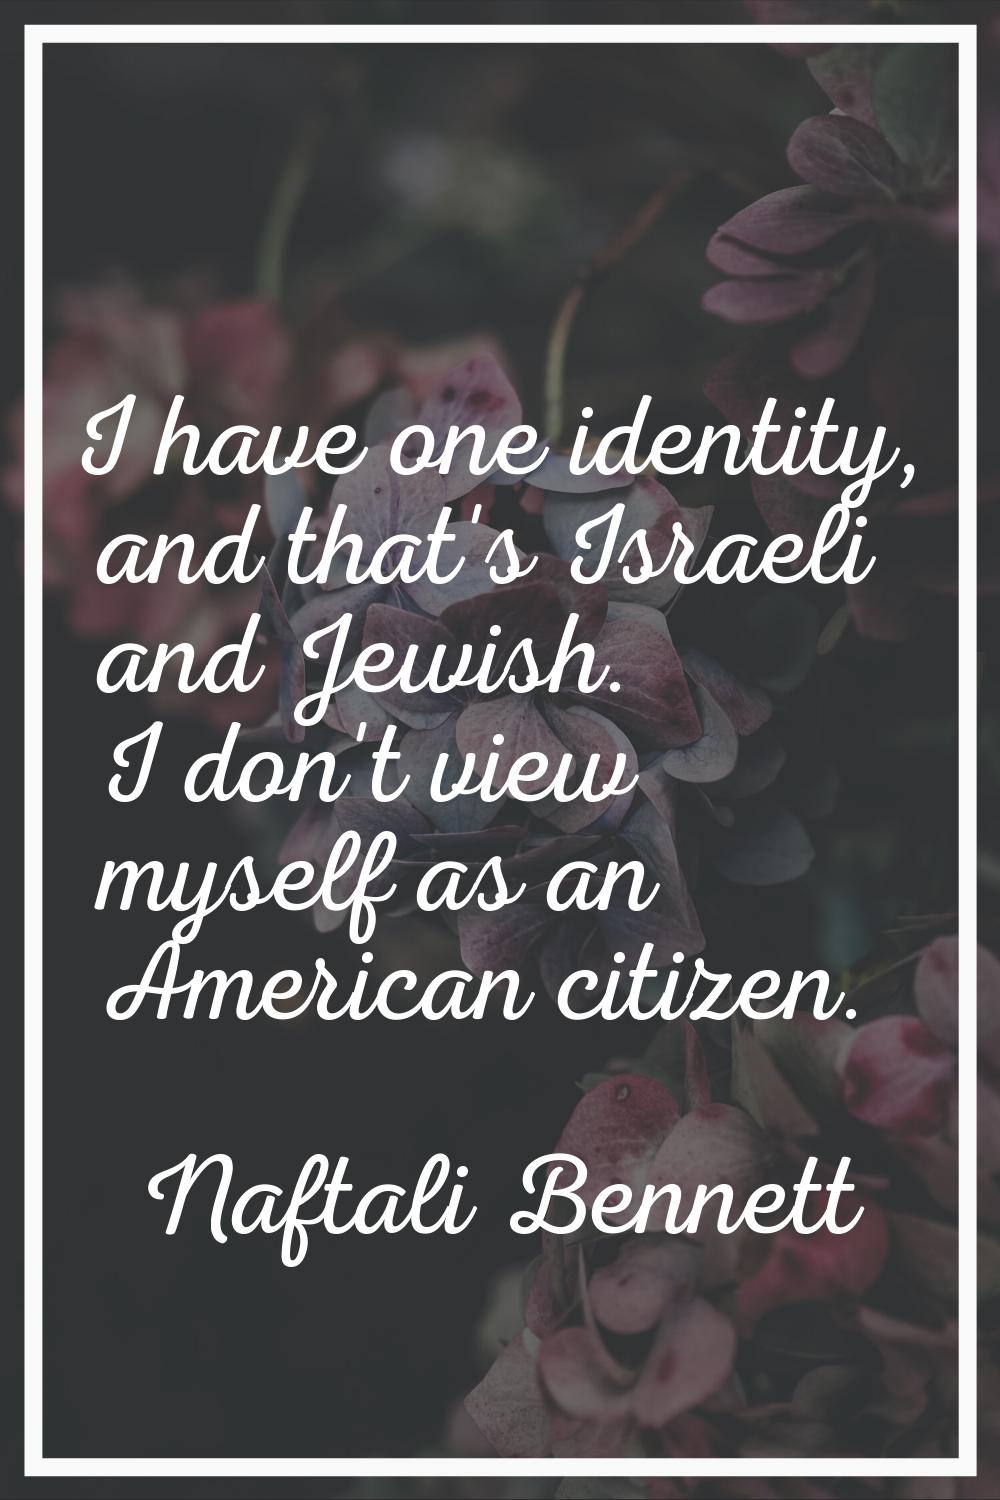 I have one identity, and that's Israeli and Jewish. I don't view myself as an American citizen.